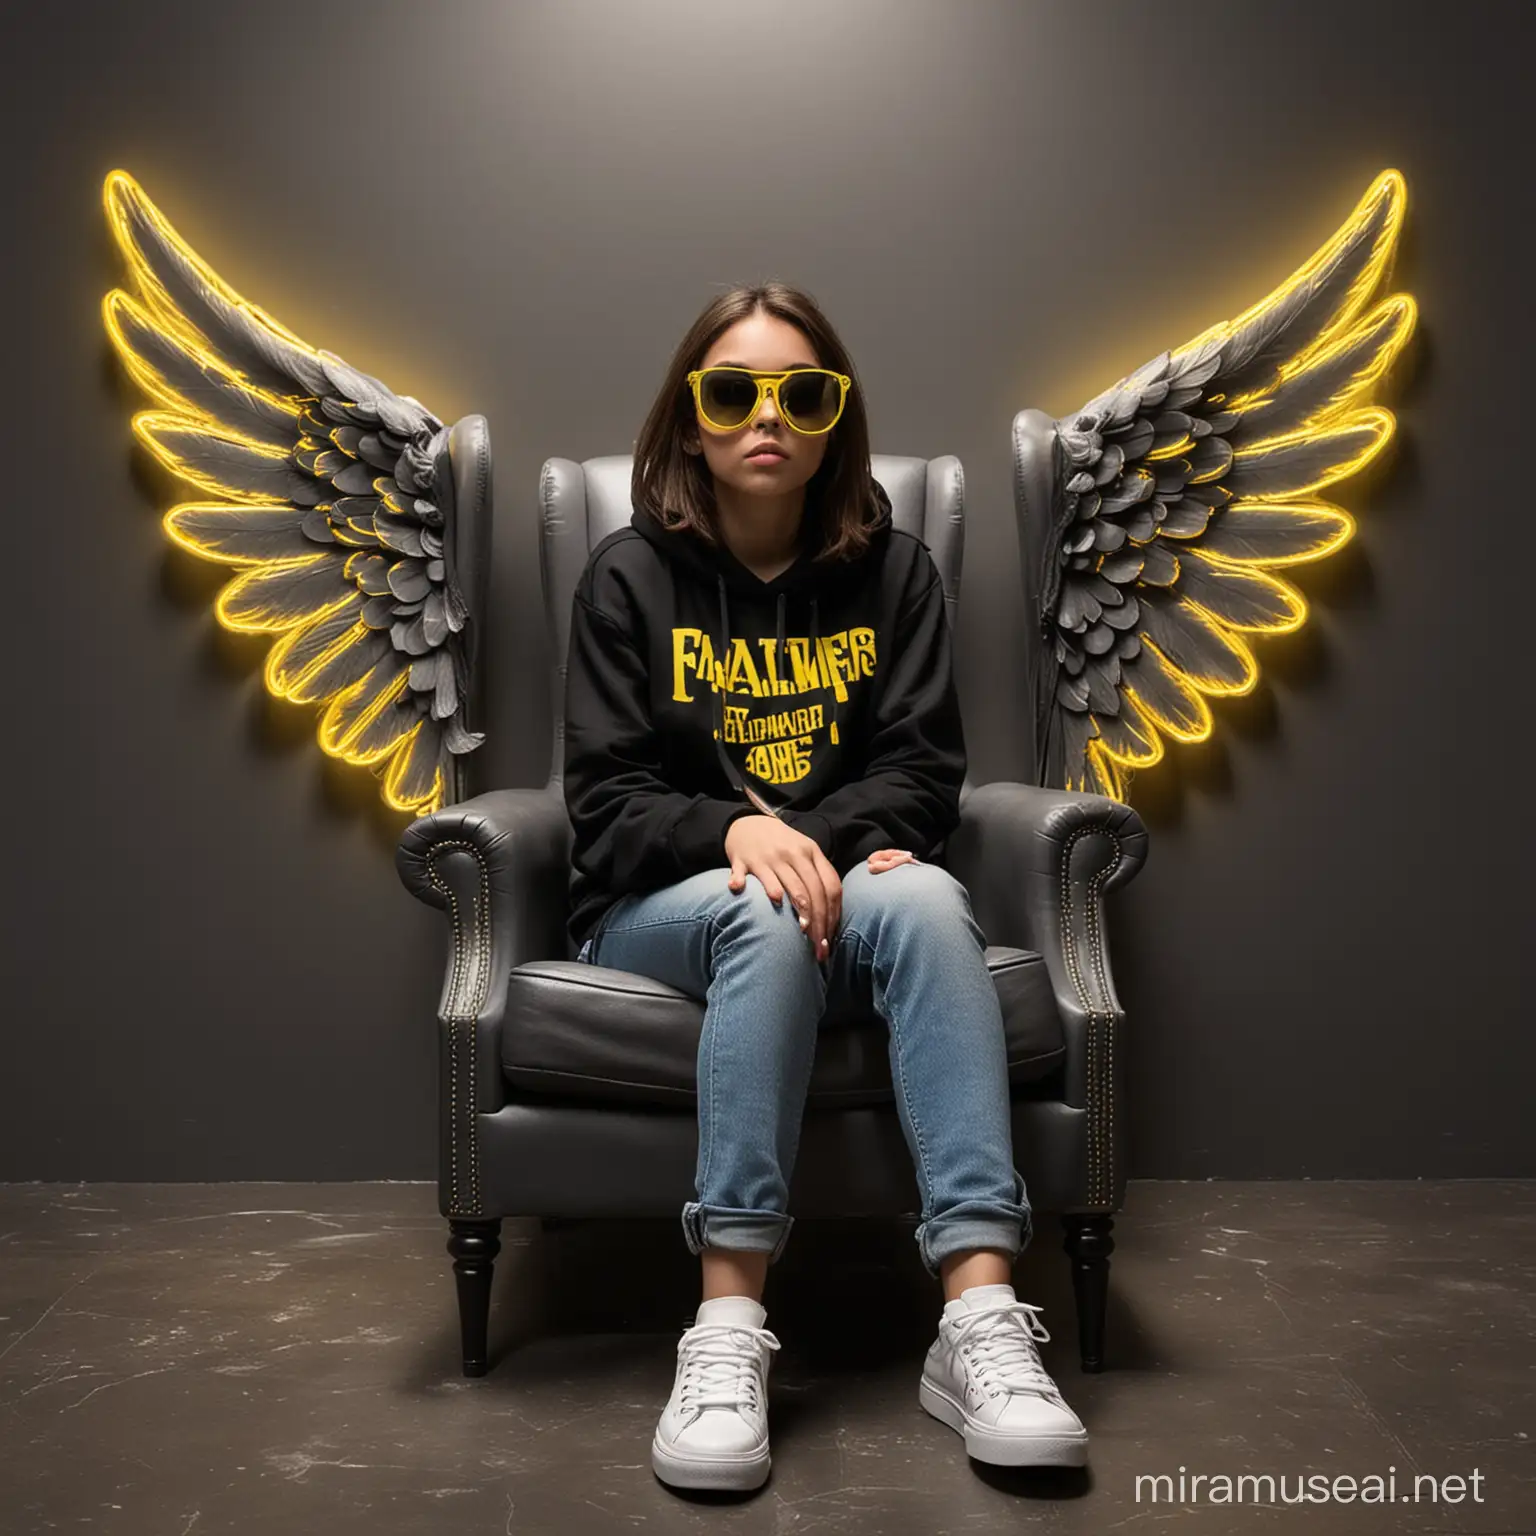 Casually Seated Teenage Girl with Fateme Neon Sign and Angelic Wings